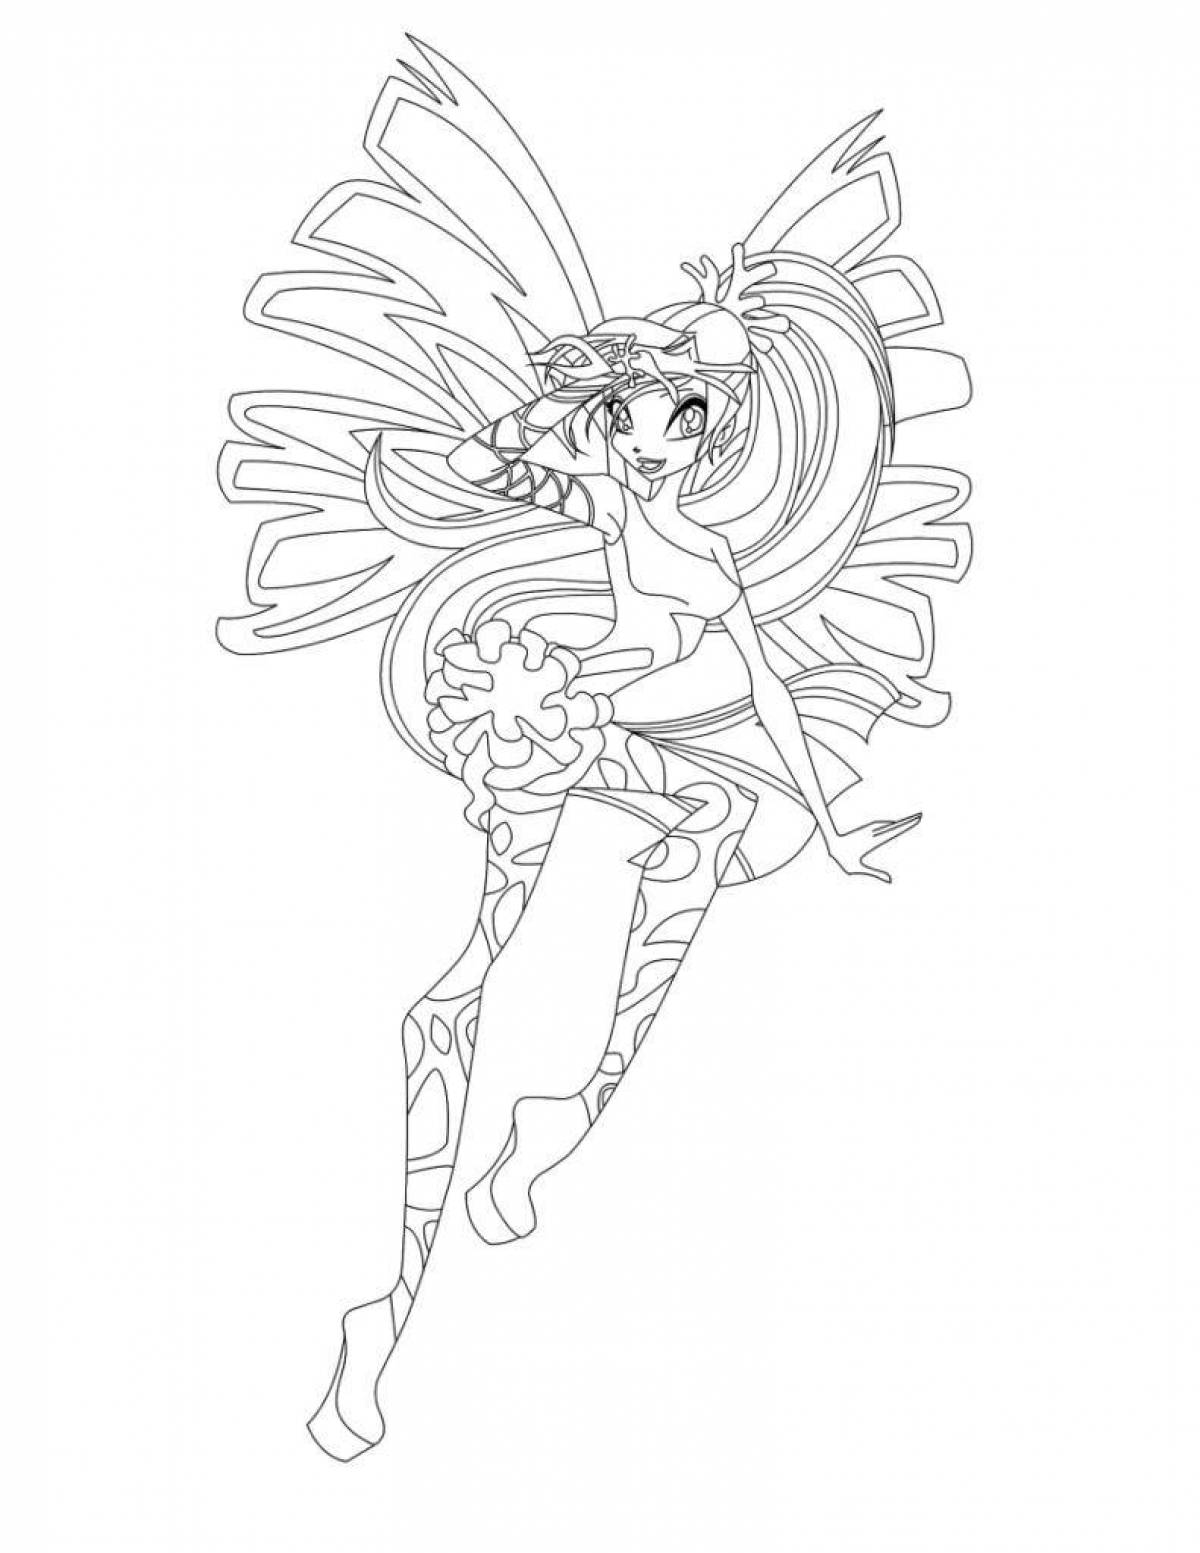 Syrenix bloom coloring page